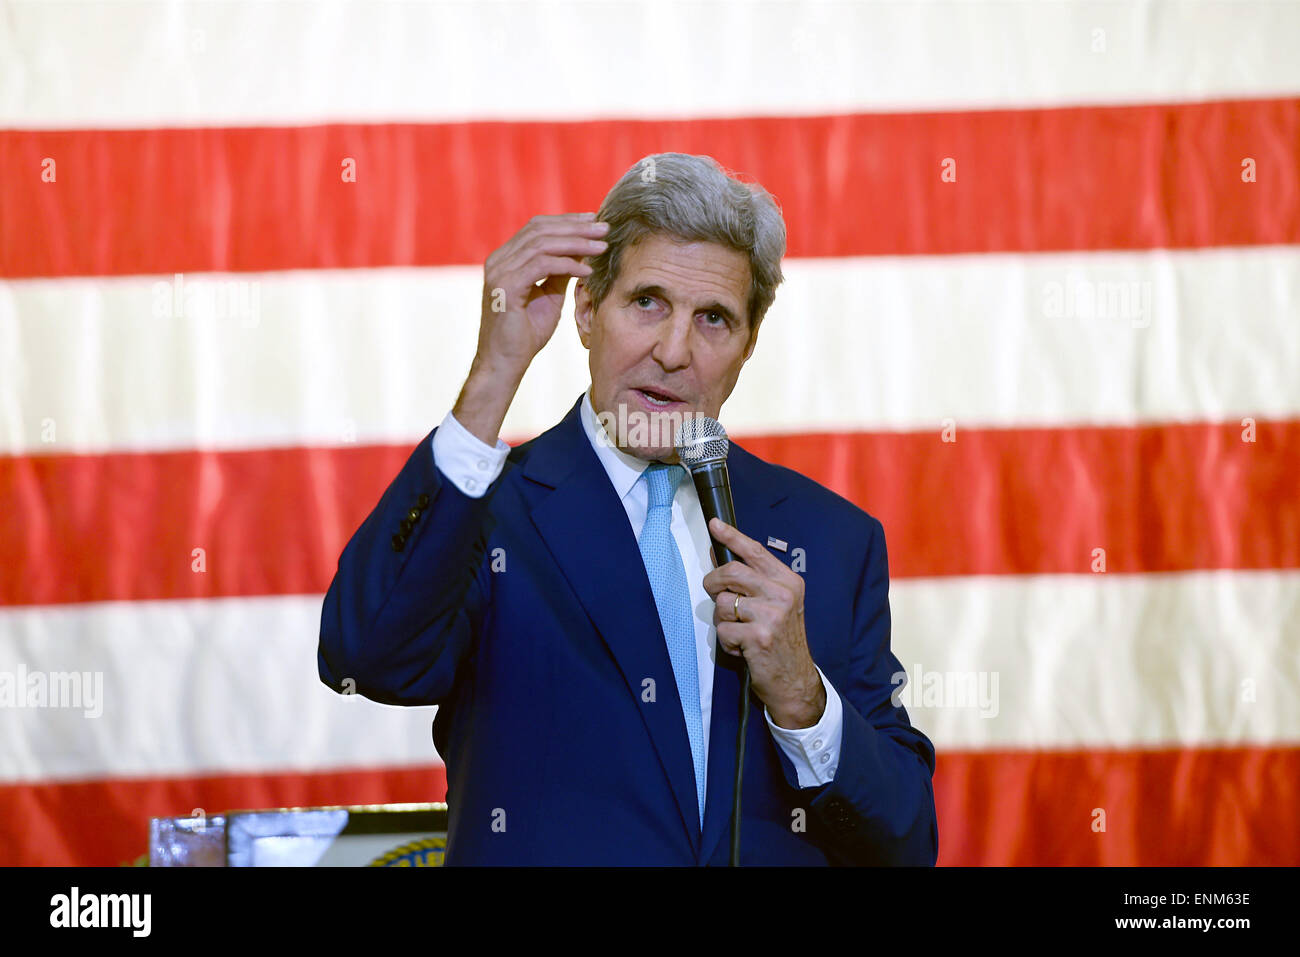 US Secretary of State John Kerry speaks to American service members during a visit to Camp Lemonnier May 6, 2015 in Djibouti, Djibouti. Stock Photo